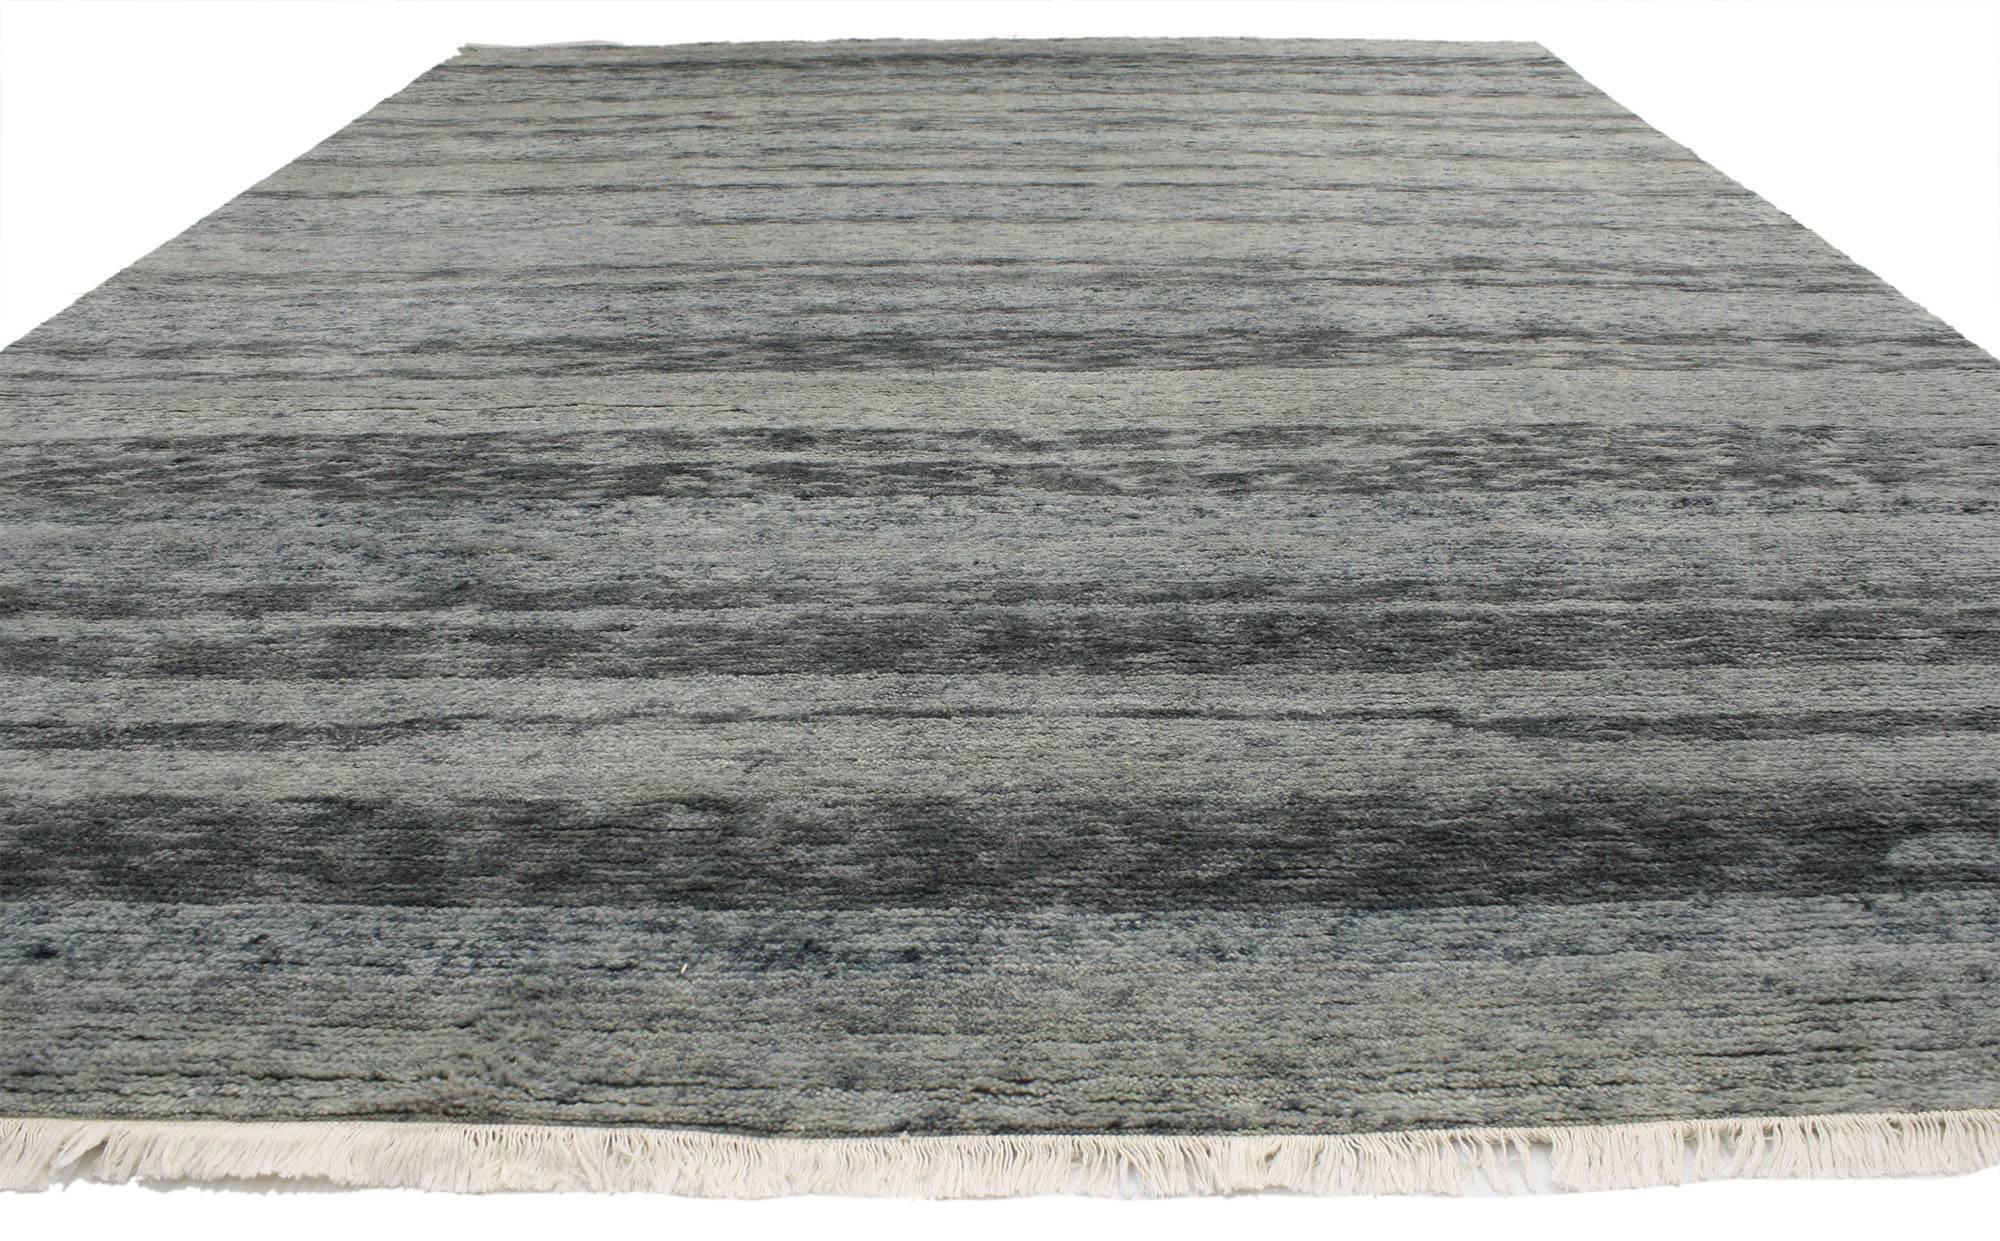 30361 Contemporary Moroccan Gray Area Rug with New Nordic Hygge Vibes and Bauhaus Style 10'01 x 13'05. This hand knotted wool contemporary Moroccan gray area rug features striated bands composed of gradations and rich waves of abrash creating an